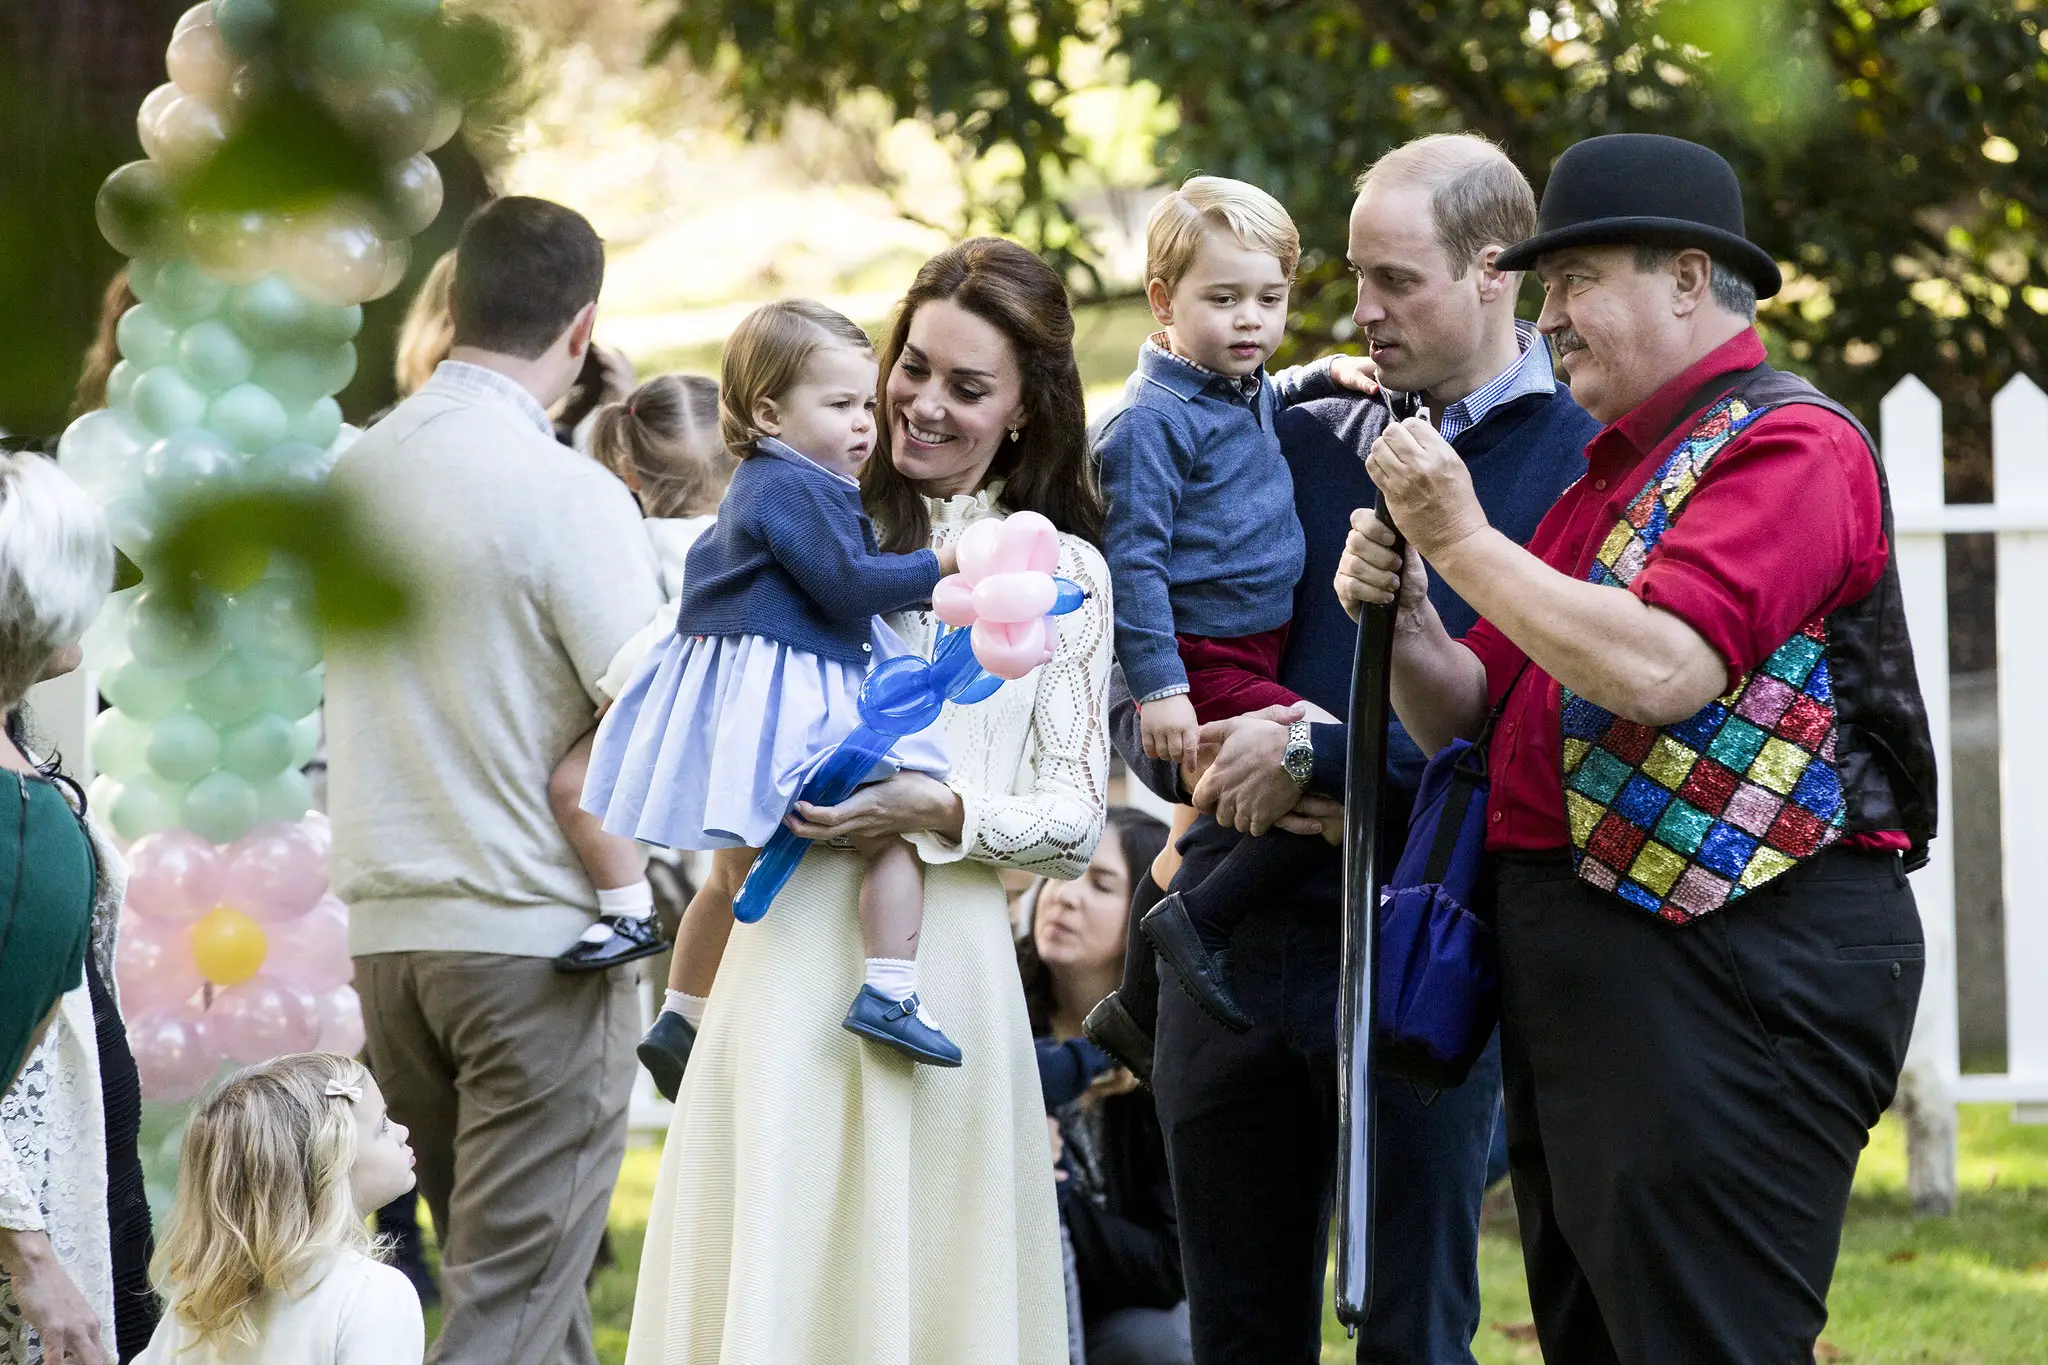 Prince George and Princess Charlotte played with balloons at the Tea Party in Canada